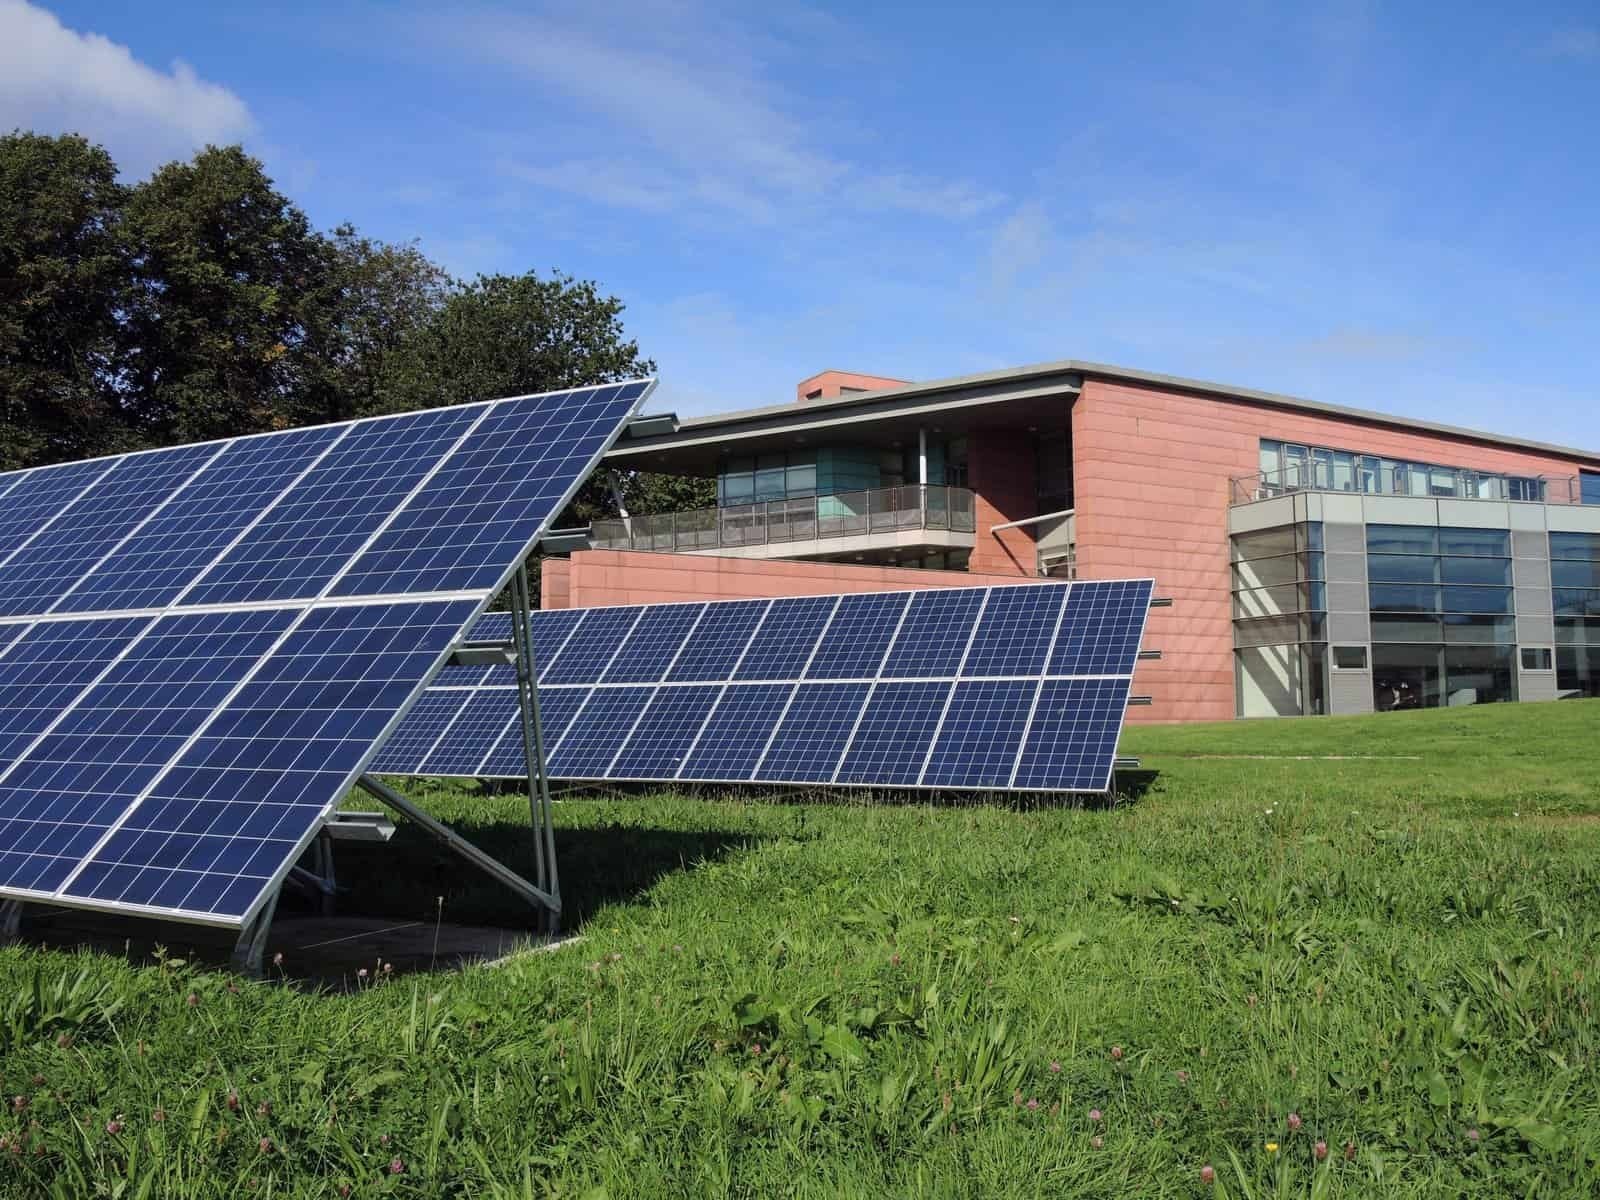 Solar panels at Dumfries and Galloway College